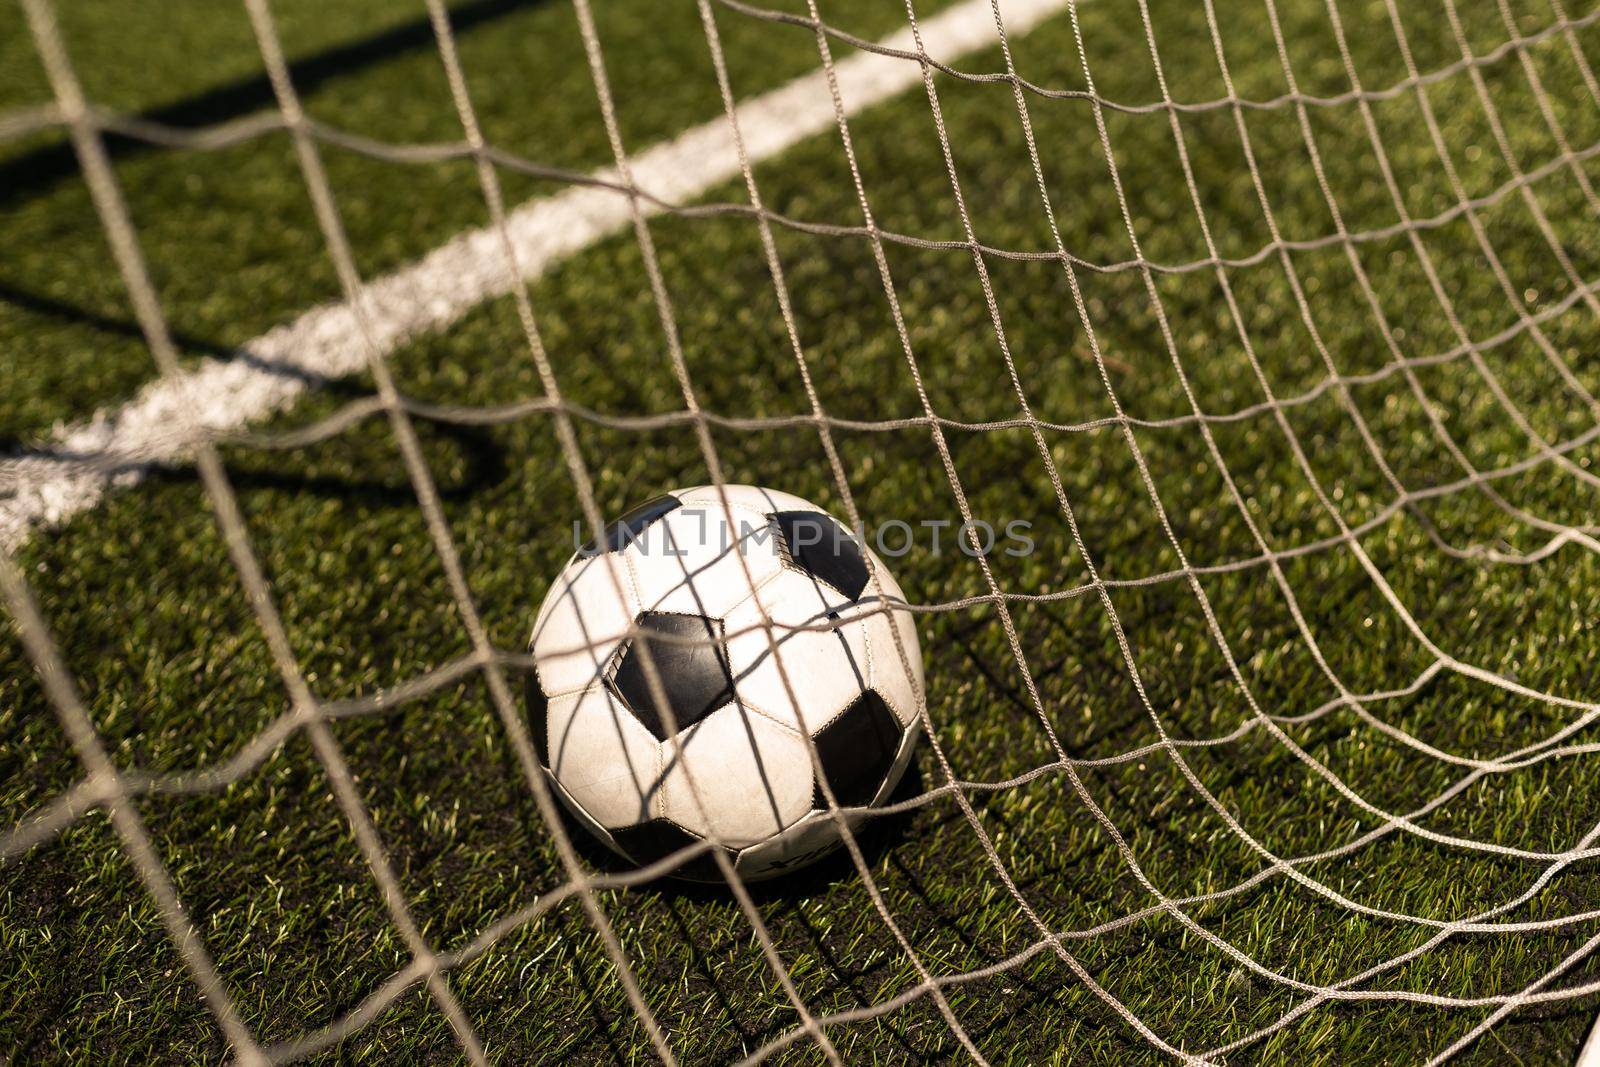 white and black soccer ball on green grass and stadium background. sports betting idea